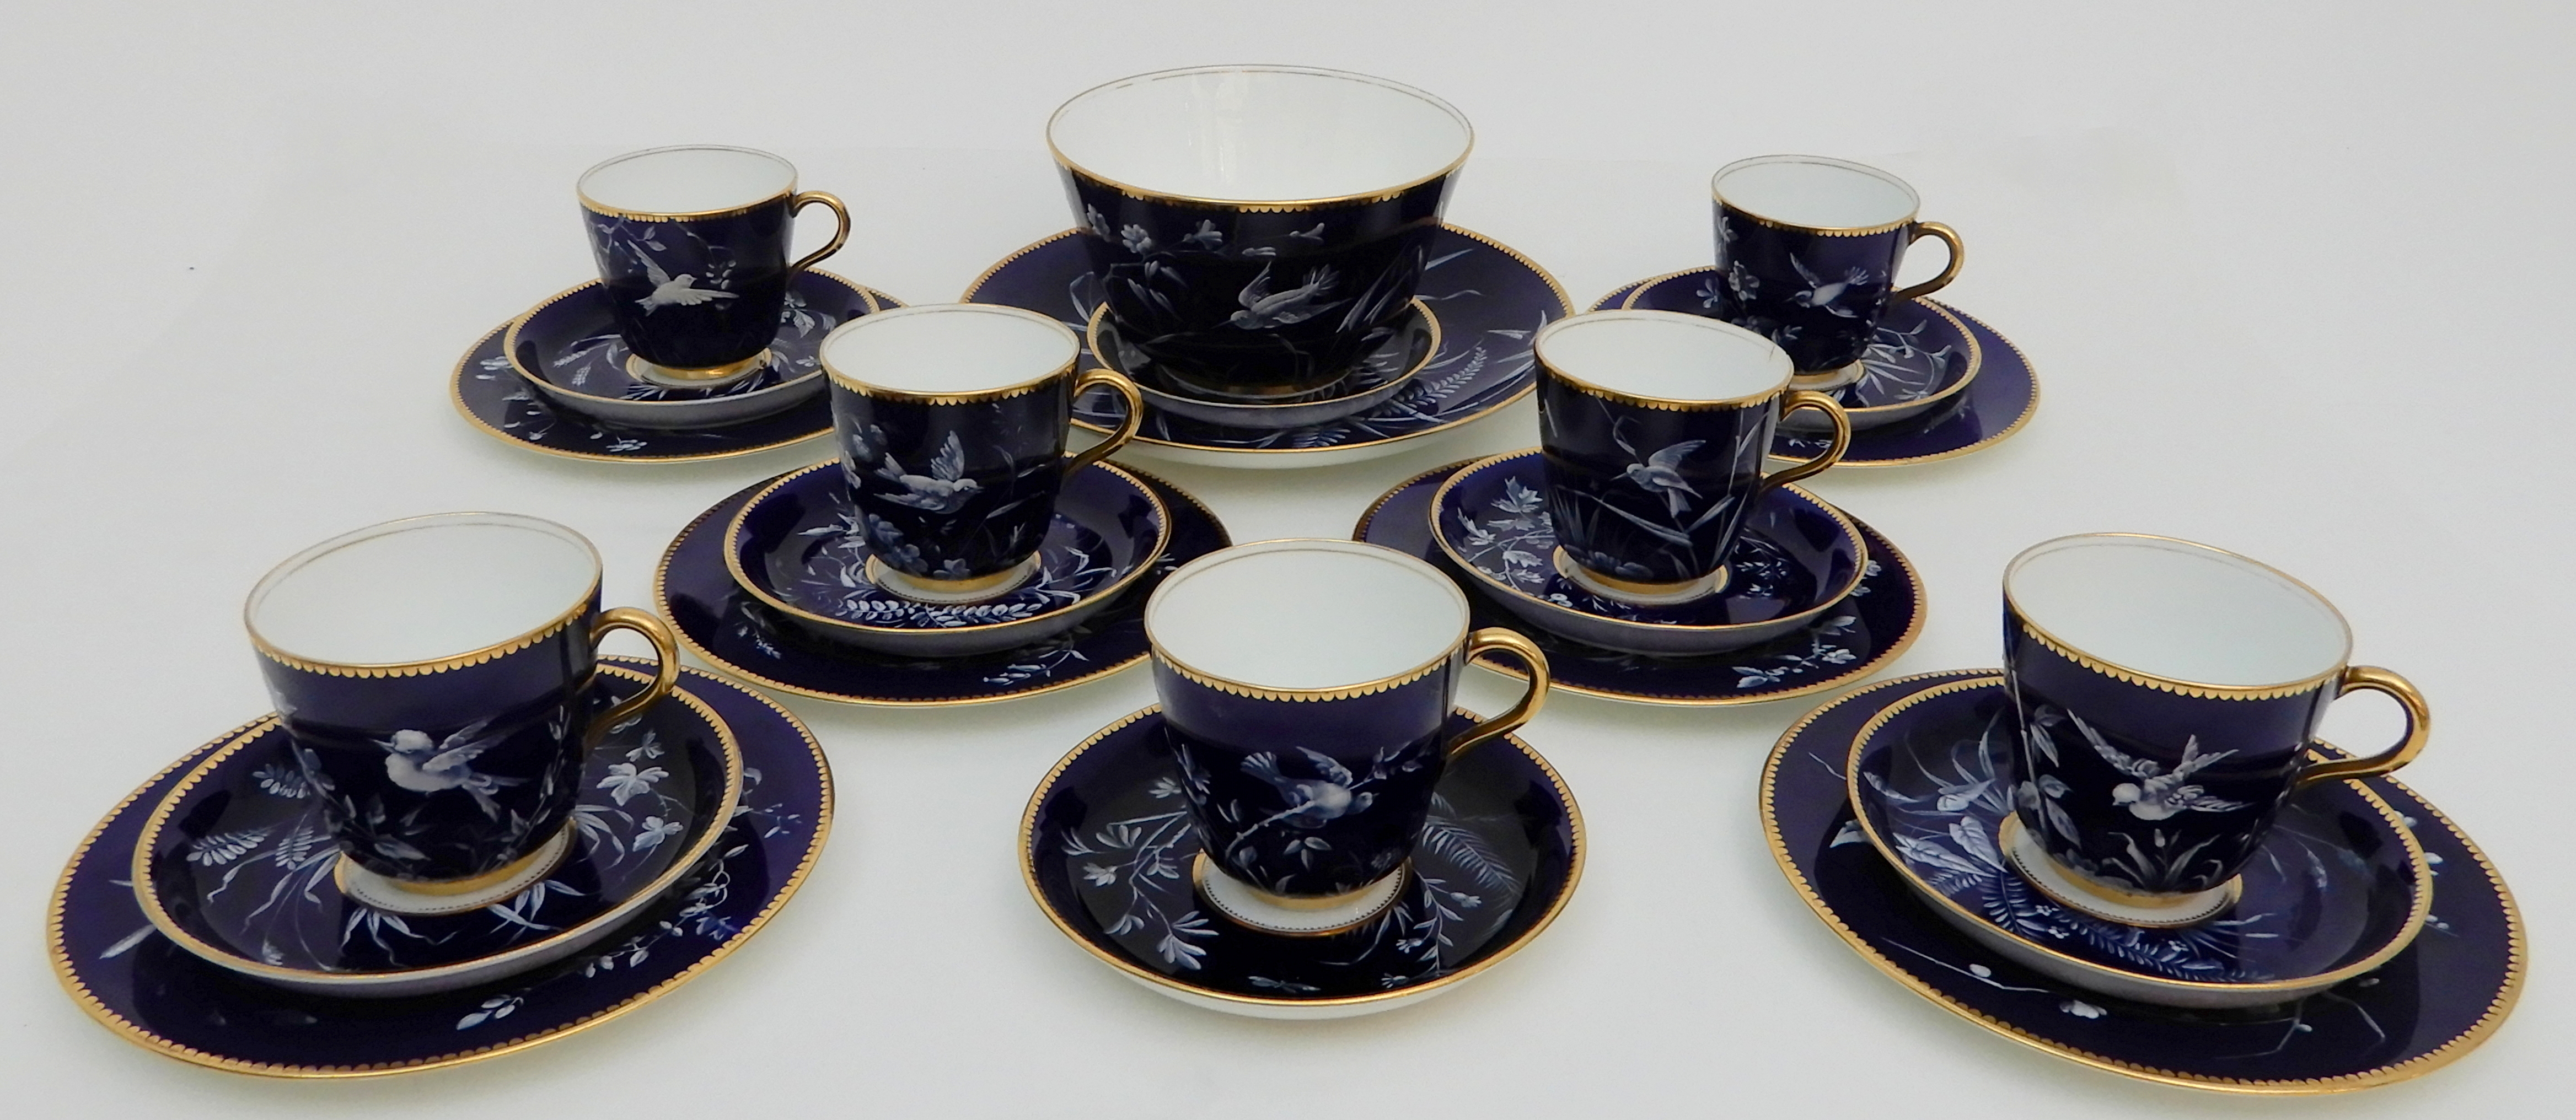 A LATE 19TH CENTURY T.C. BROWN-WESTHEAD MOORE AND CO PATE SUR PATE TEASET comprising eight cups, - Image 10 of 19